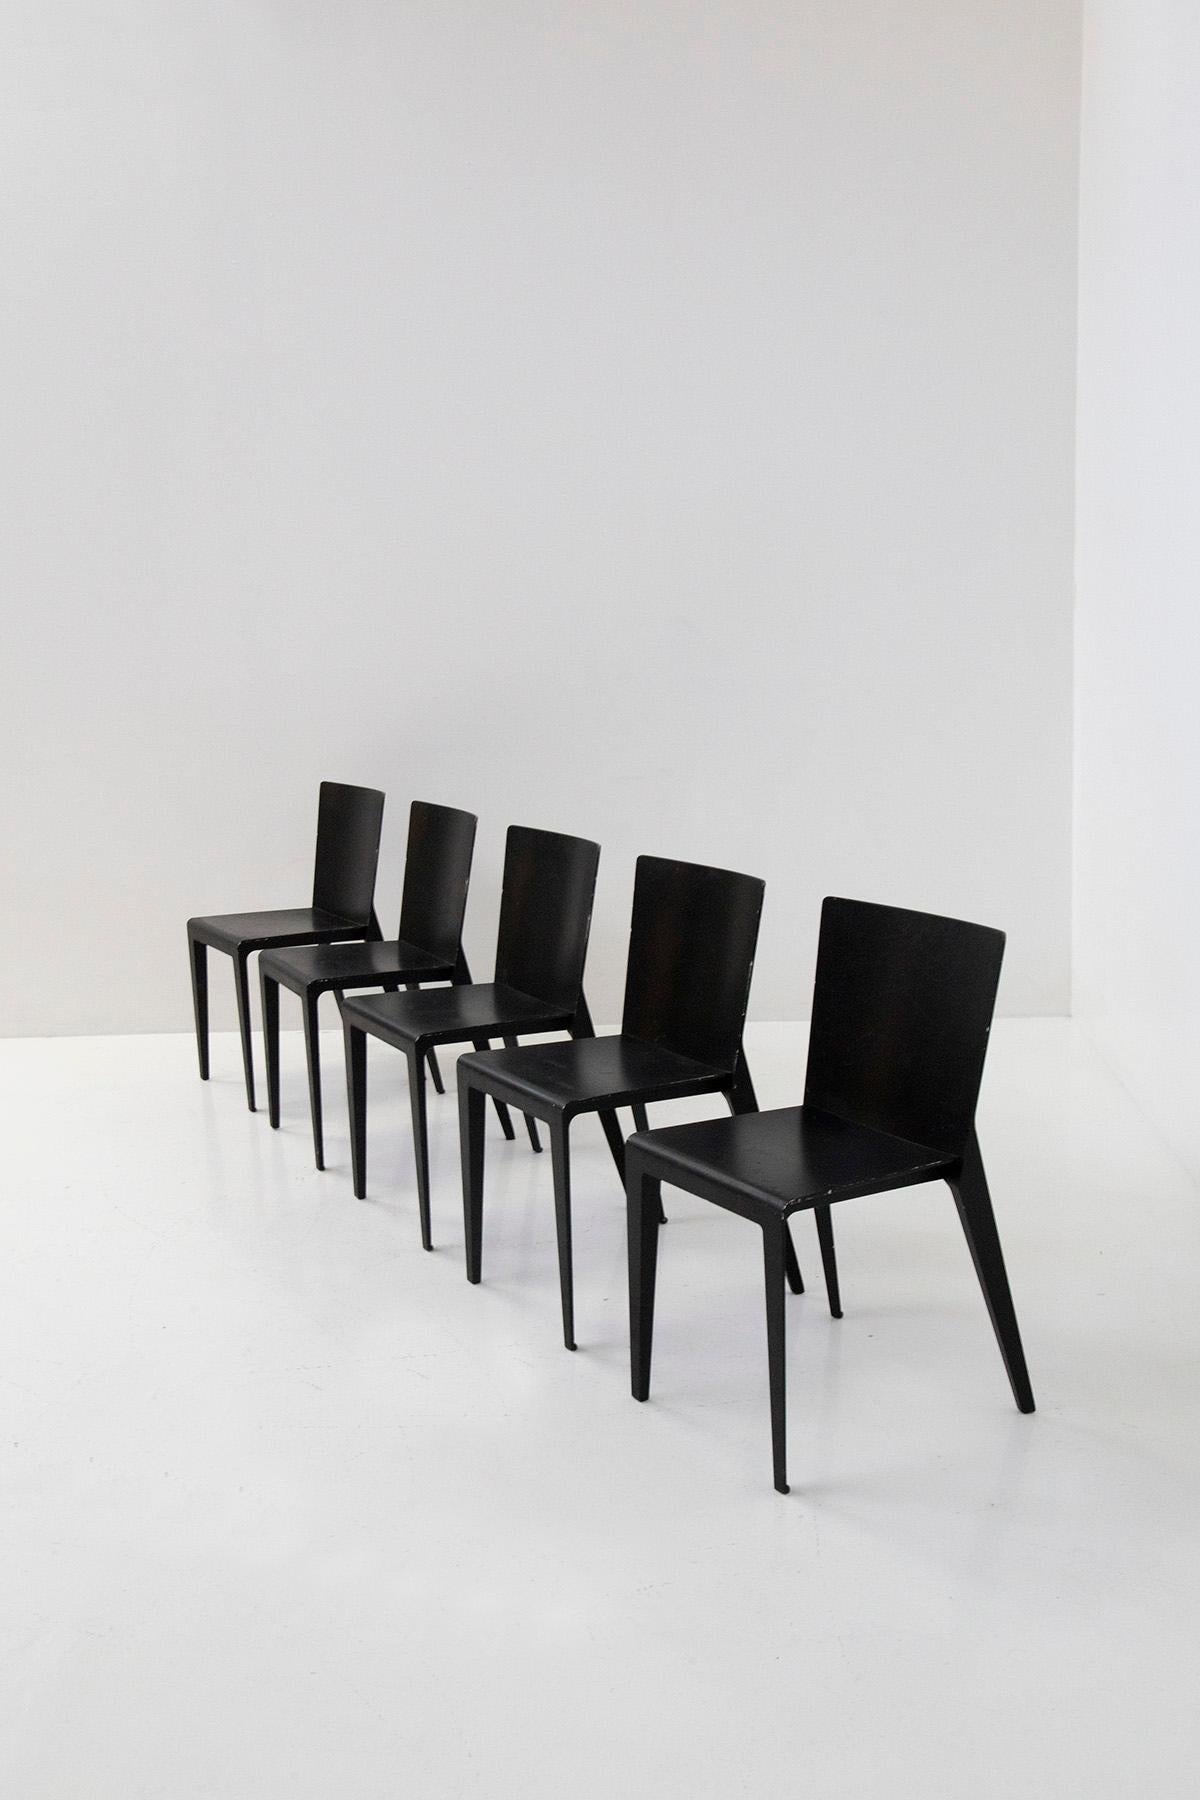 Set of five Alfa model chairs produced by Molteni in 2001 based on a design by Hannes Wettstein for the Italian manufacturer Molteni. 
Alfa was created from the combination of only two pieces: one is the backrest that continues into the rear legs,